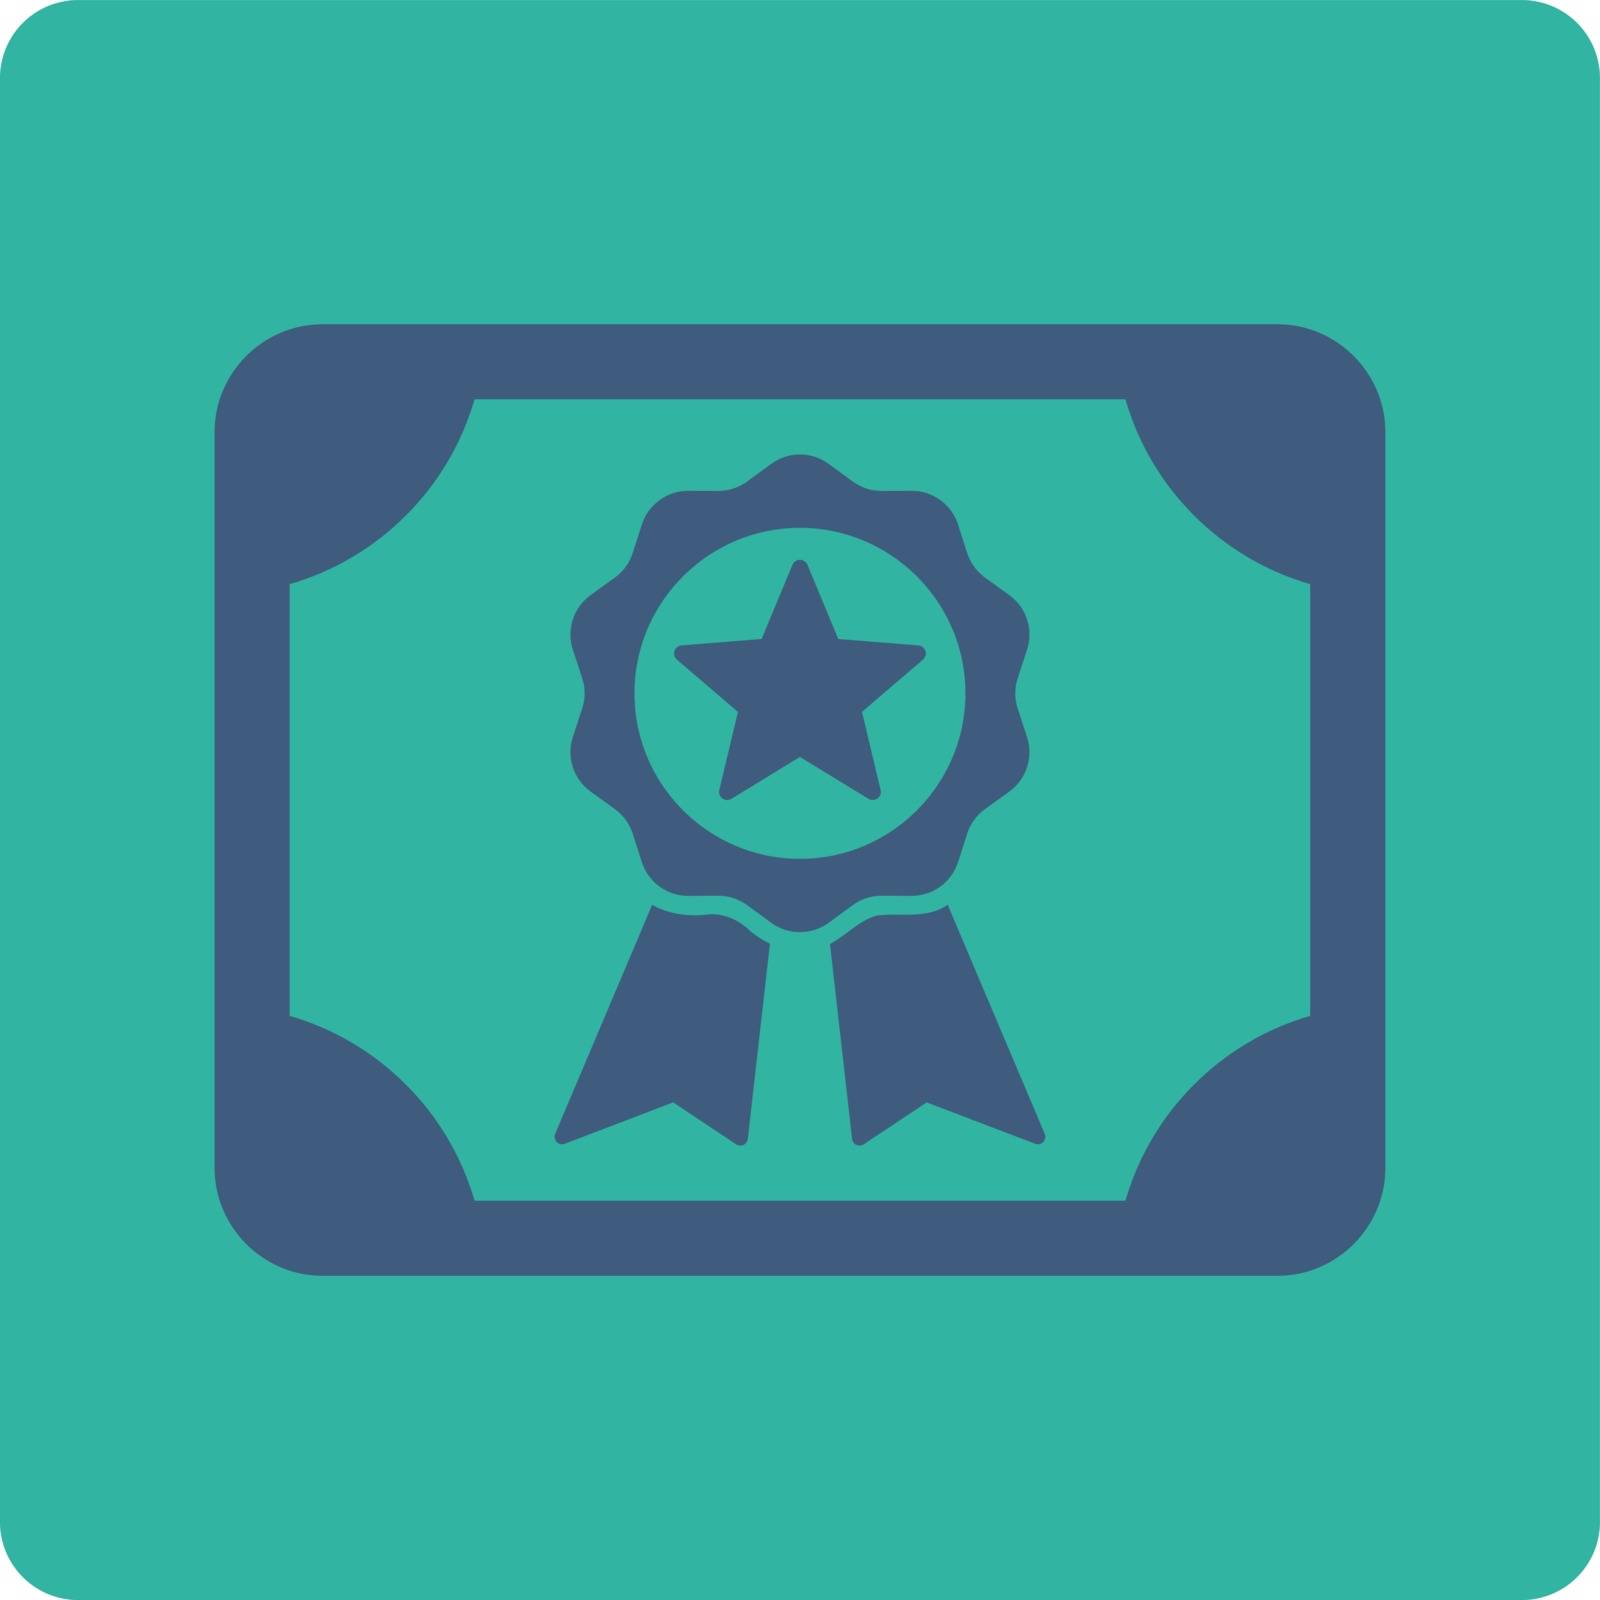 Certificate icon by ahasoft